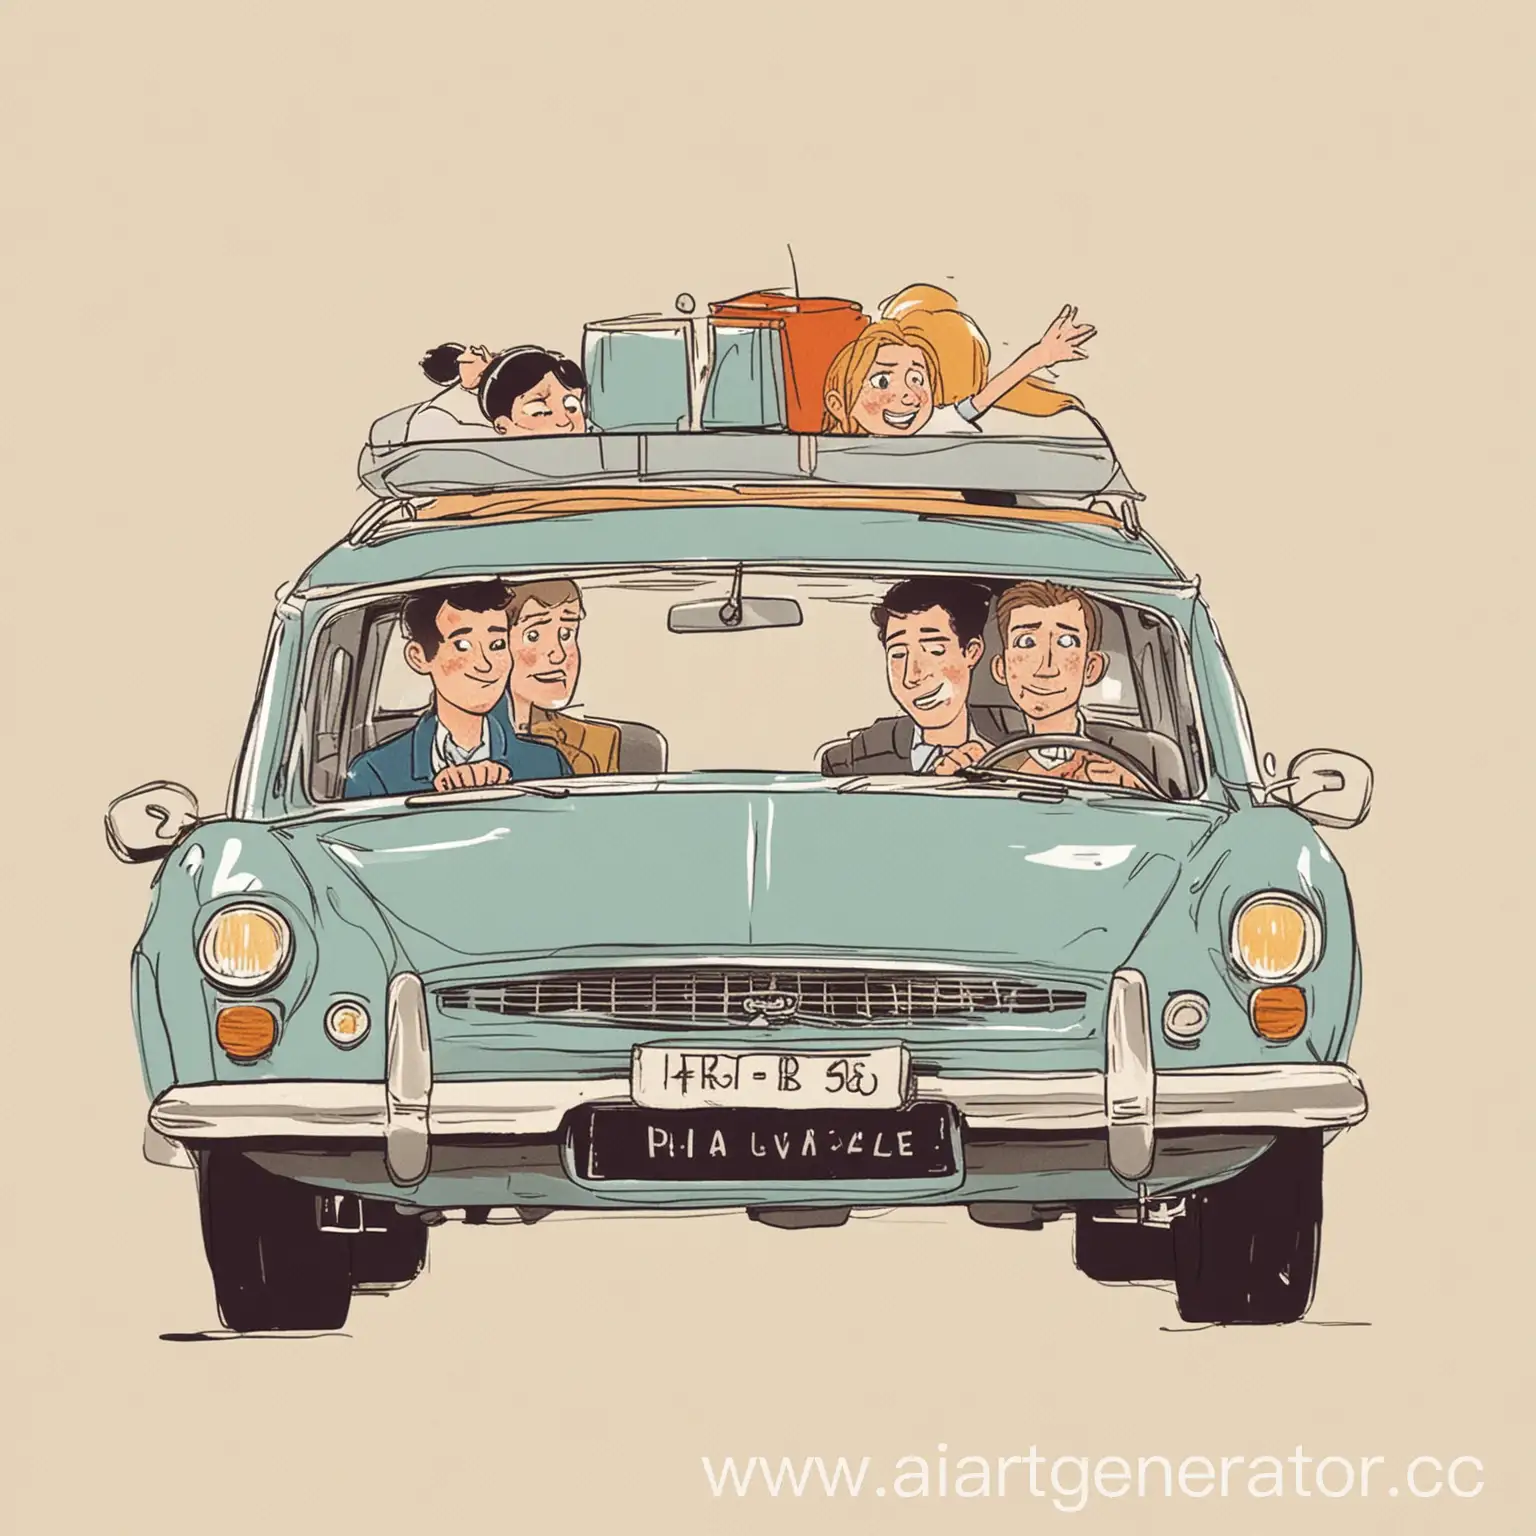 car pooling draw a vector with 4 adult passengers in a French car going to work